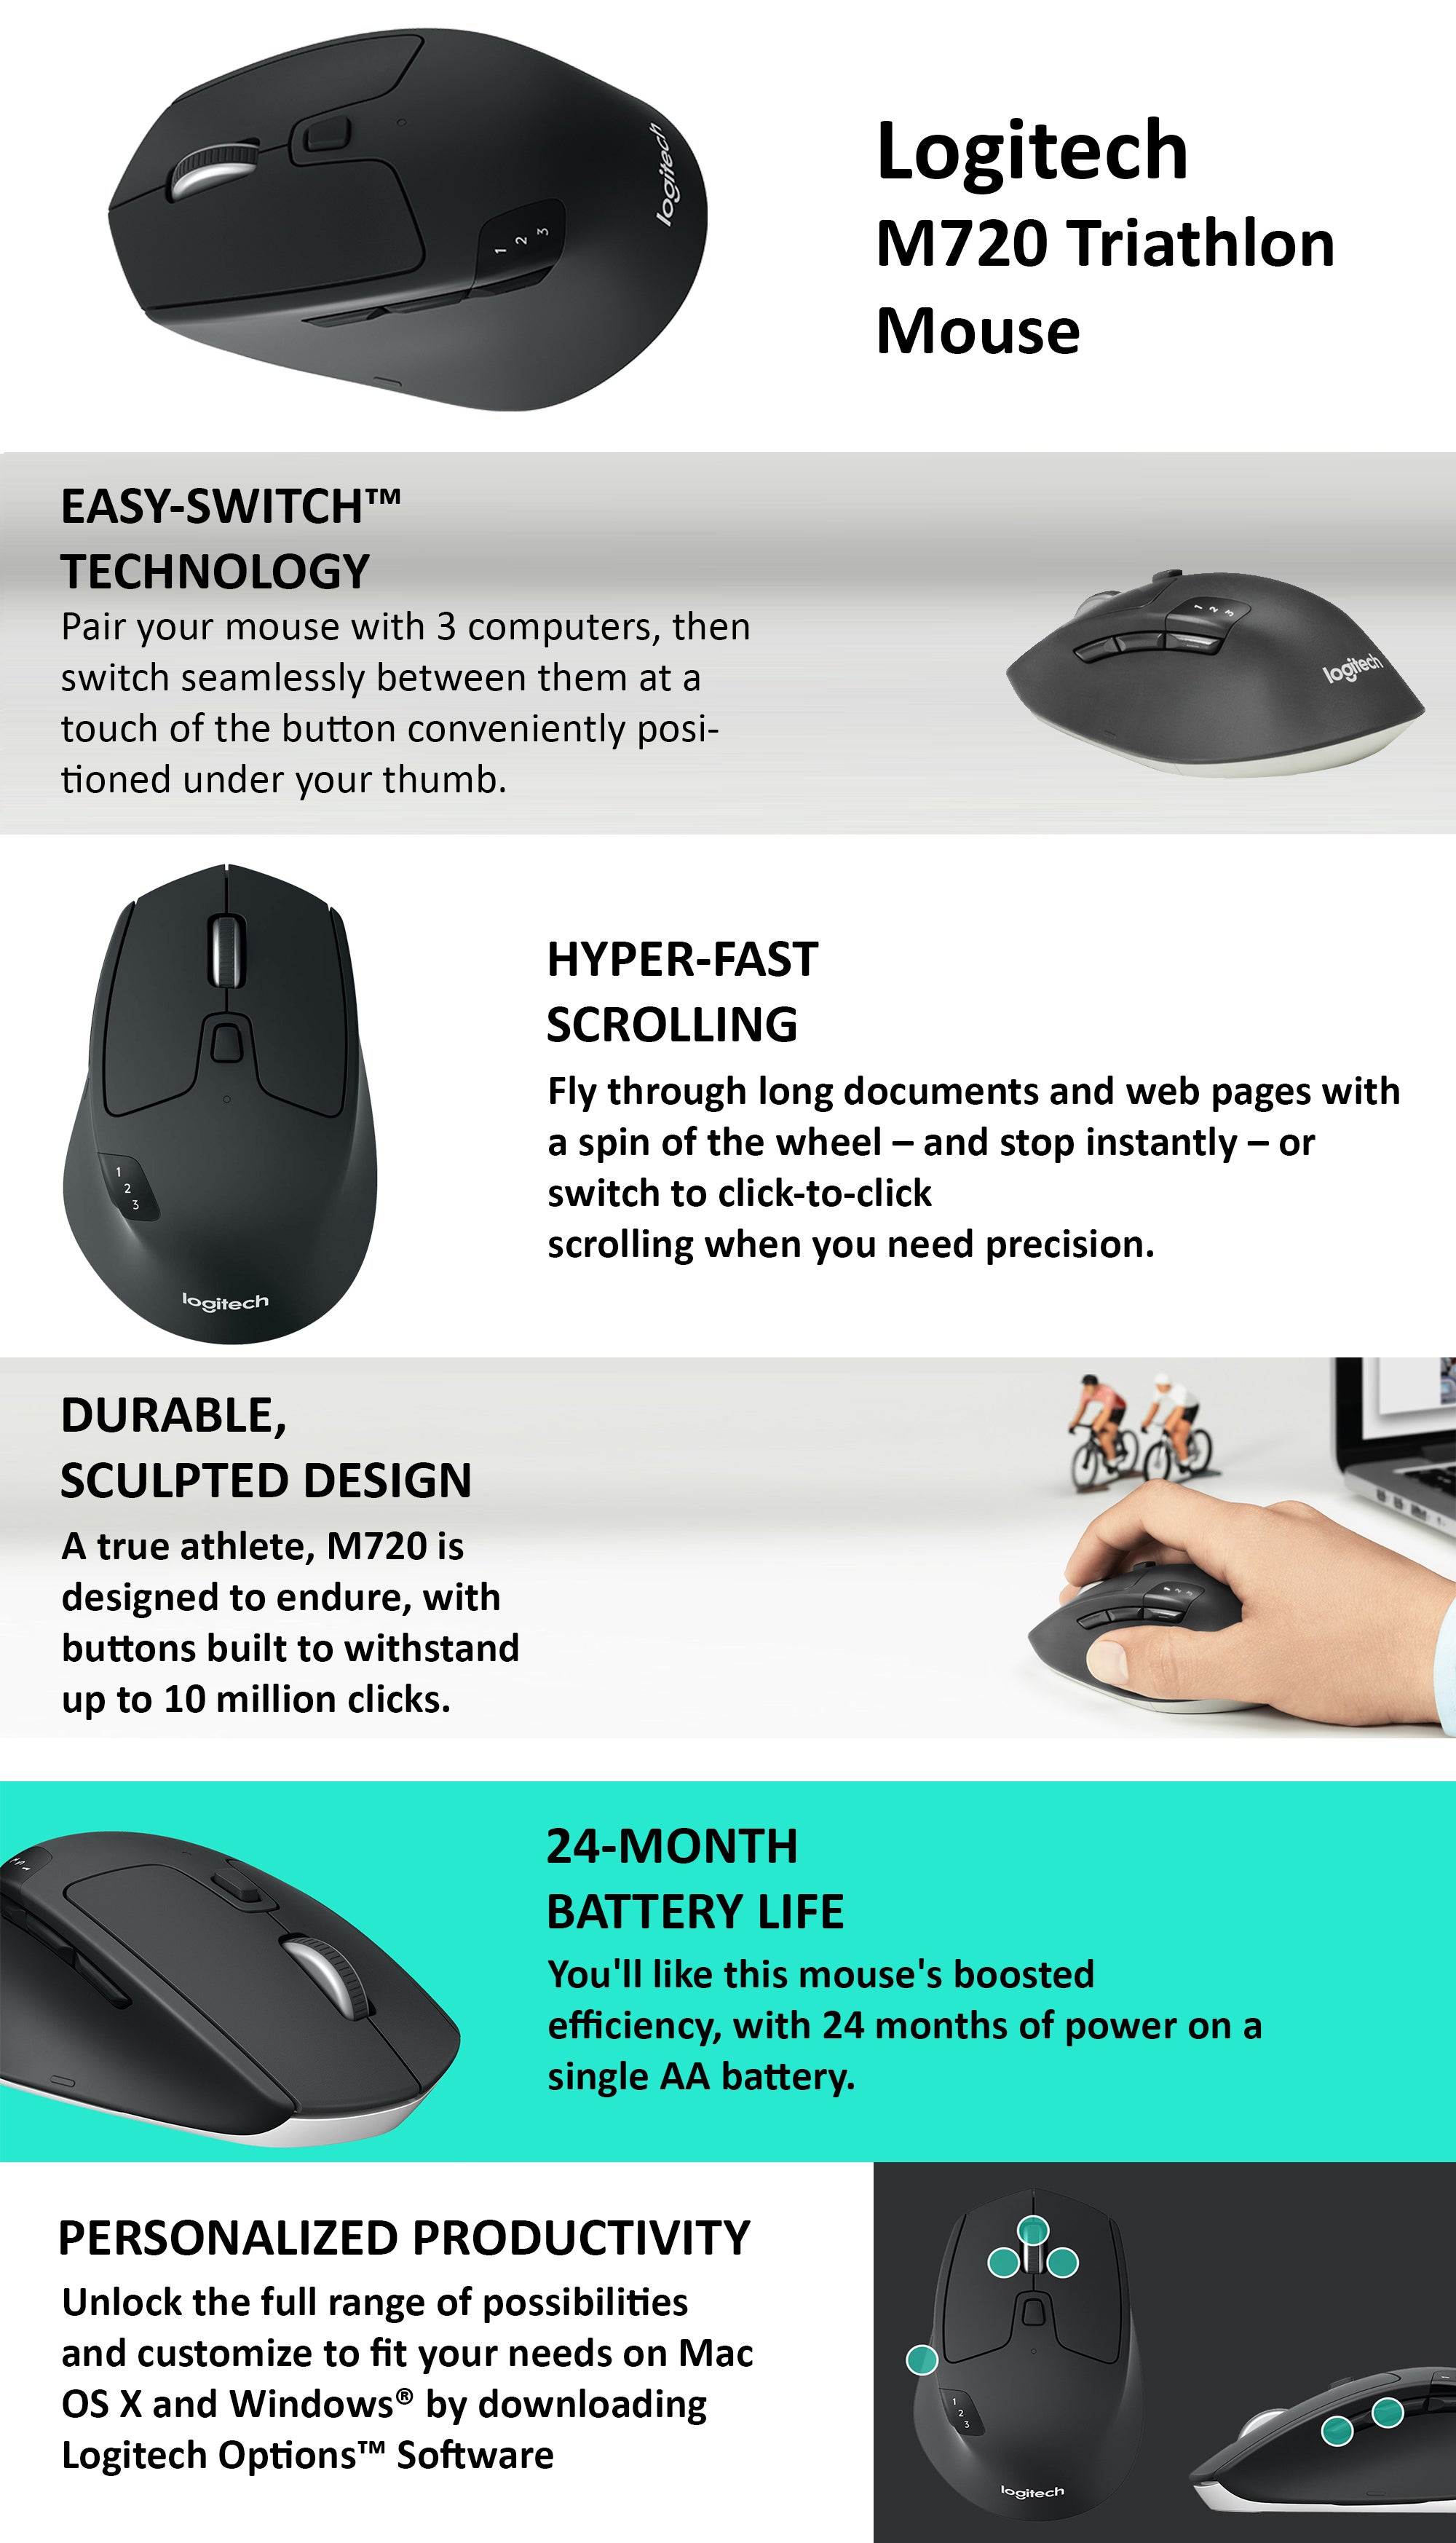  Logitech M720 Triathlon Multi-Device Wireless Mouse, Bluetooth,  USB Unifying Receiver, 1000 DPI, 8 Buttons, 2-Year Battery, Compatible with  Laptop, PC, Mac, iPadOS - Black : Electronics